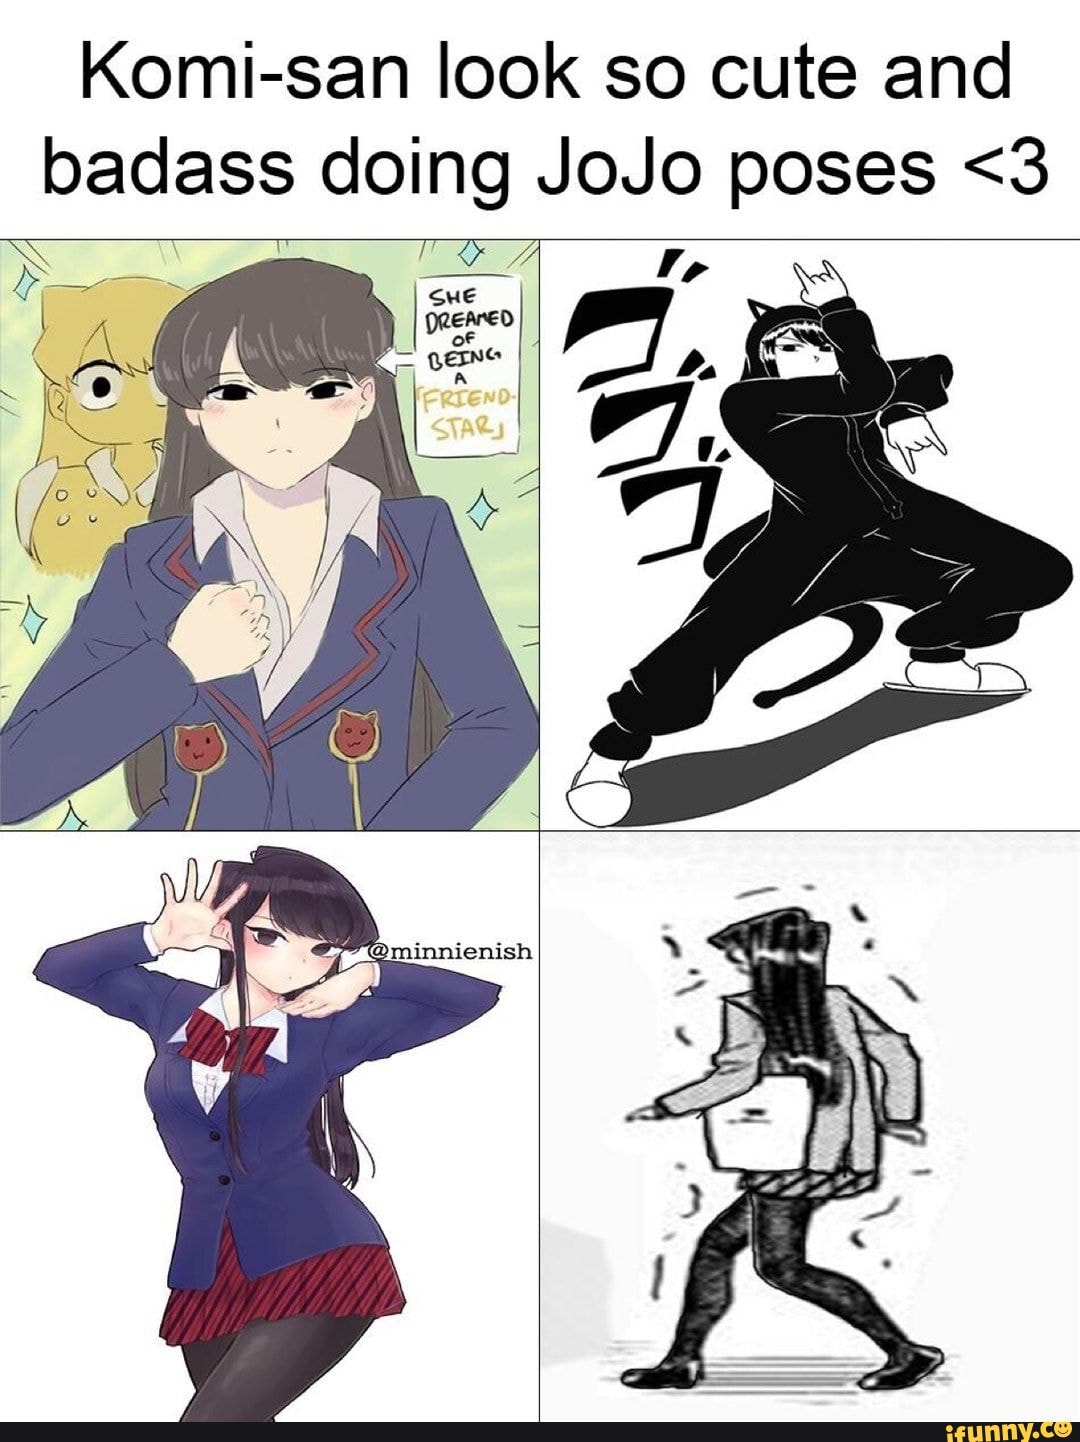 JoJo poses are so cool - iFunny